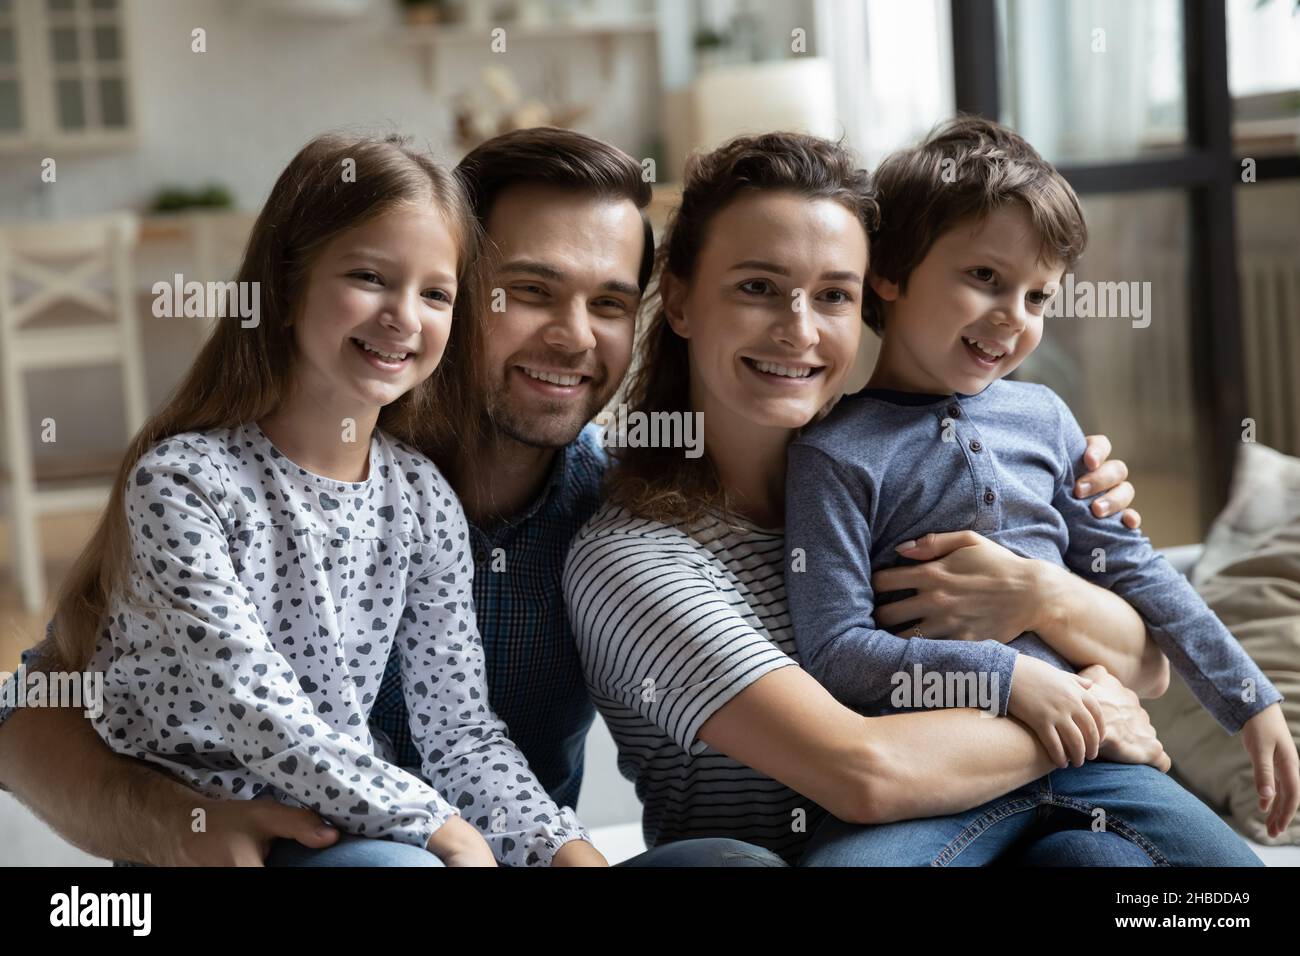 Head shot portrait happy family with two children at home Stock Photo